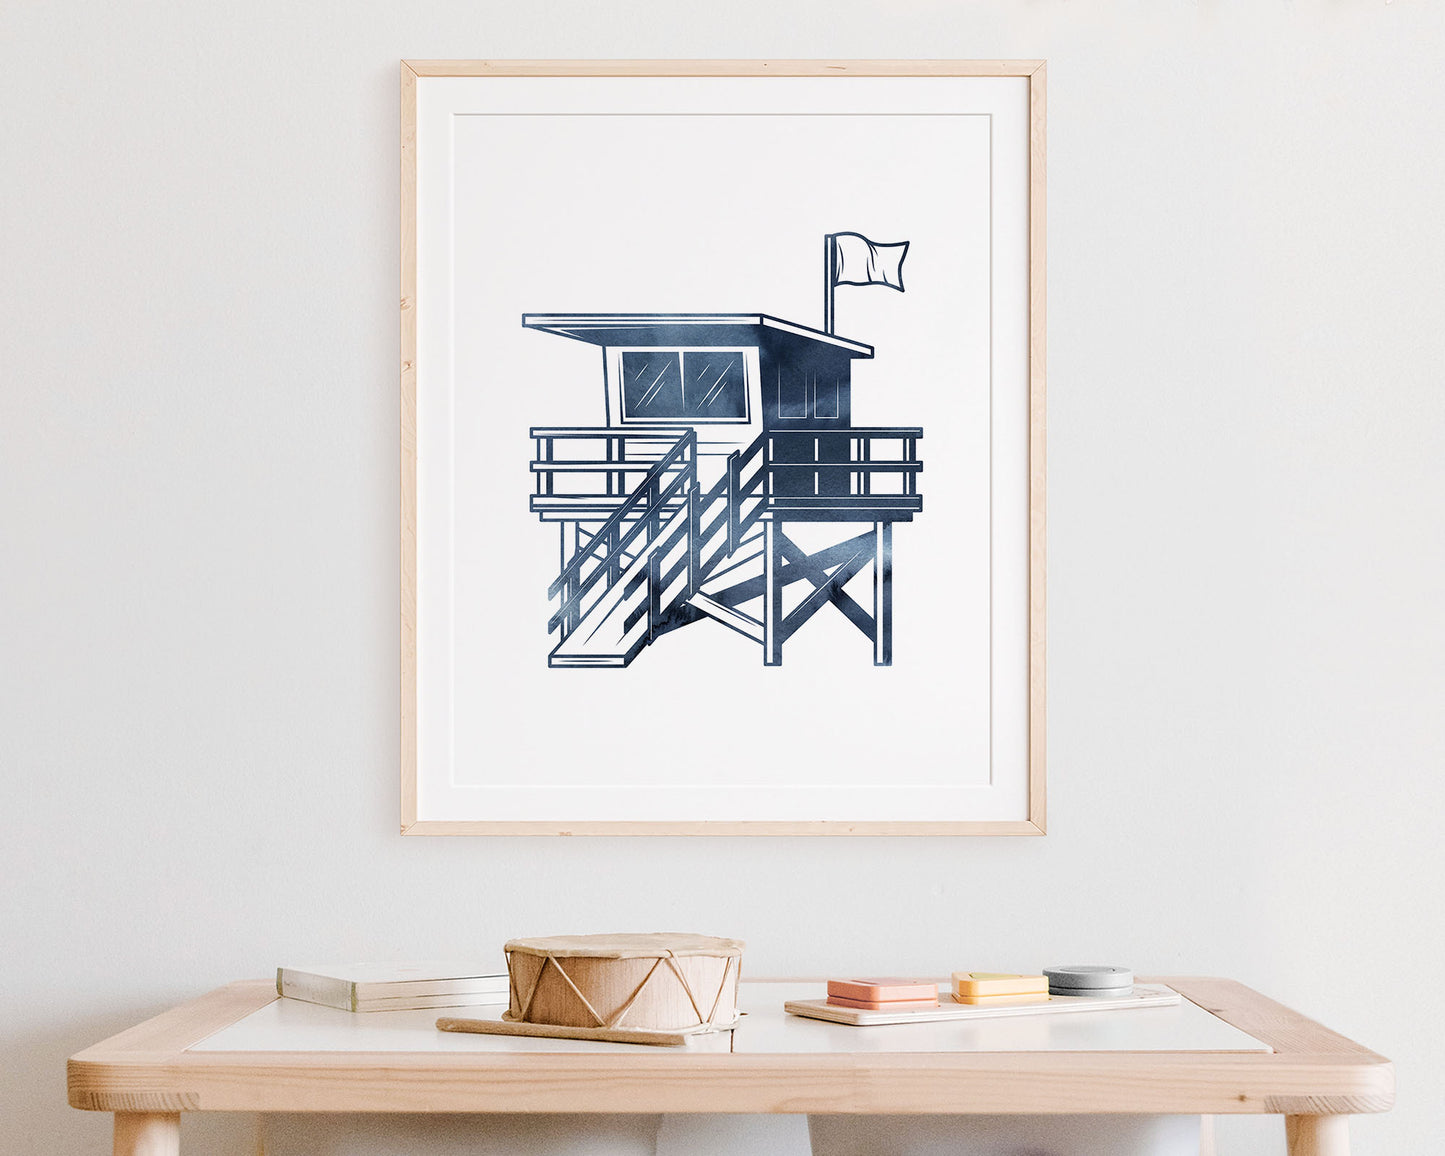 Watercolor Surf Themed Printable Wall Art featuring deep dark navy blue watercolor illustration of a Lifeguard Stand. Perfect for Baby Boy Surf Nursery Decor, Baby Girl Surf Nursery Wall Art, Kids Coastal Bedroom Decor or Children's Beach Bathroom Wall Art or California Wall Art Playroom Decor.